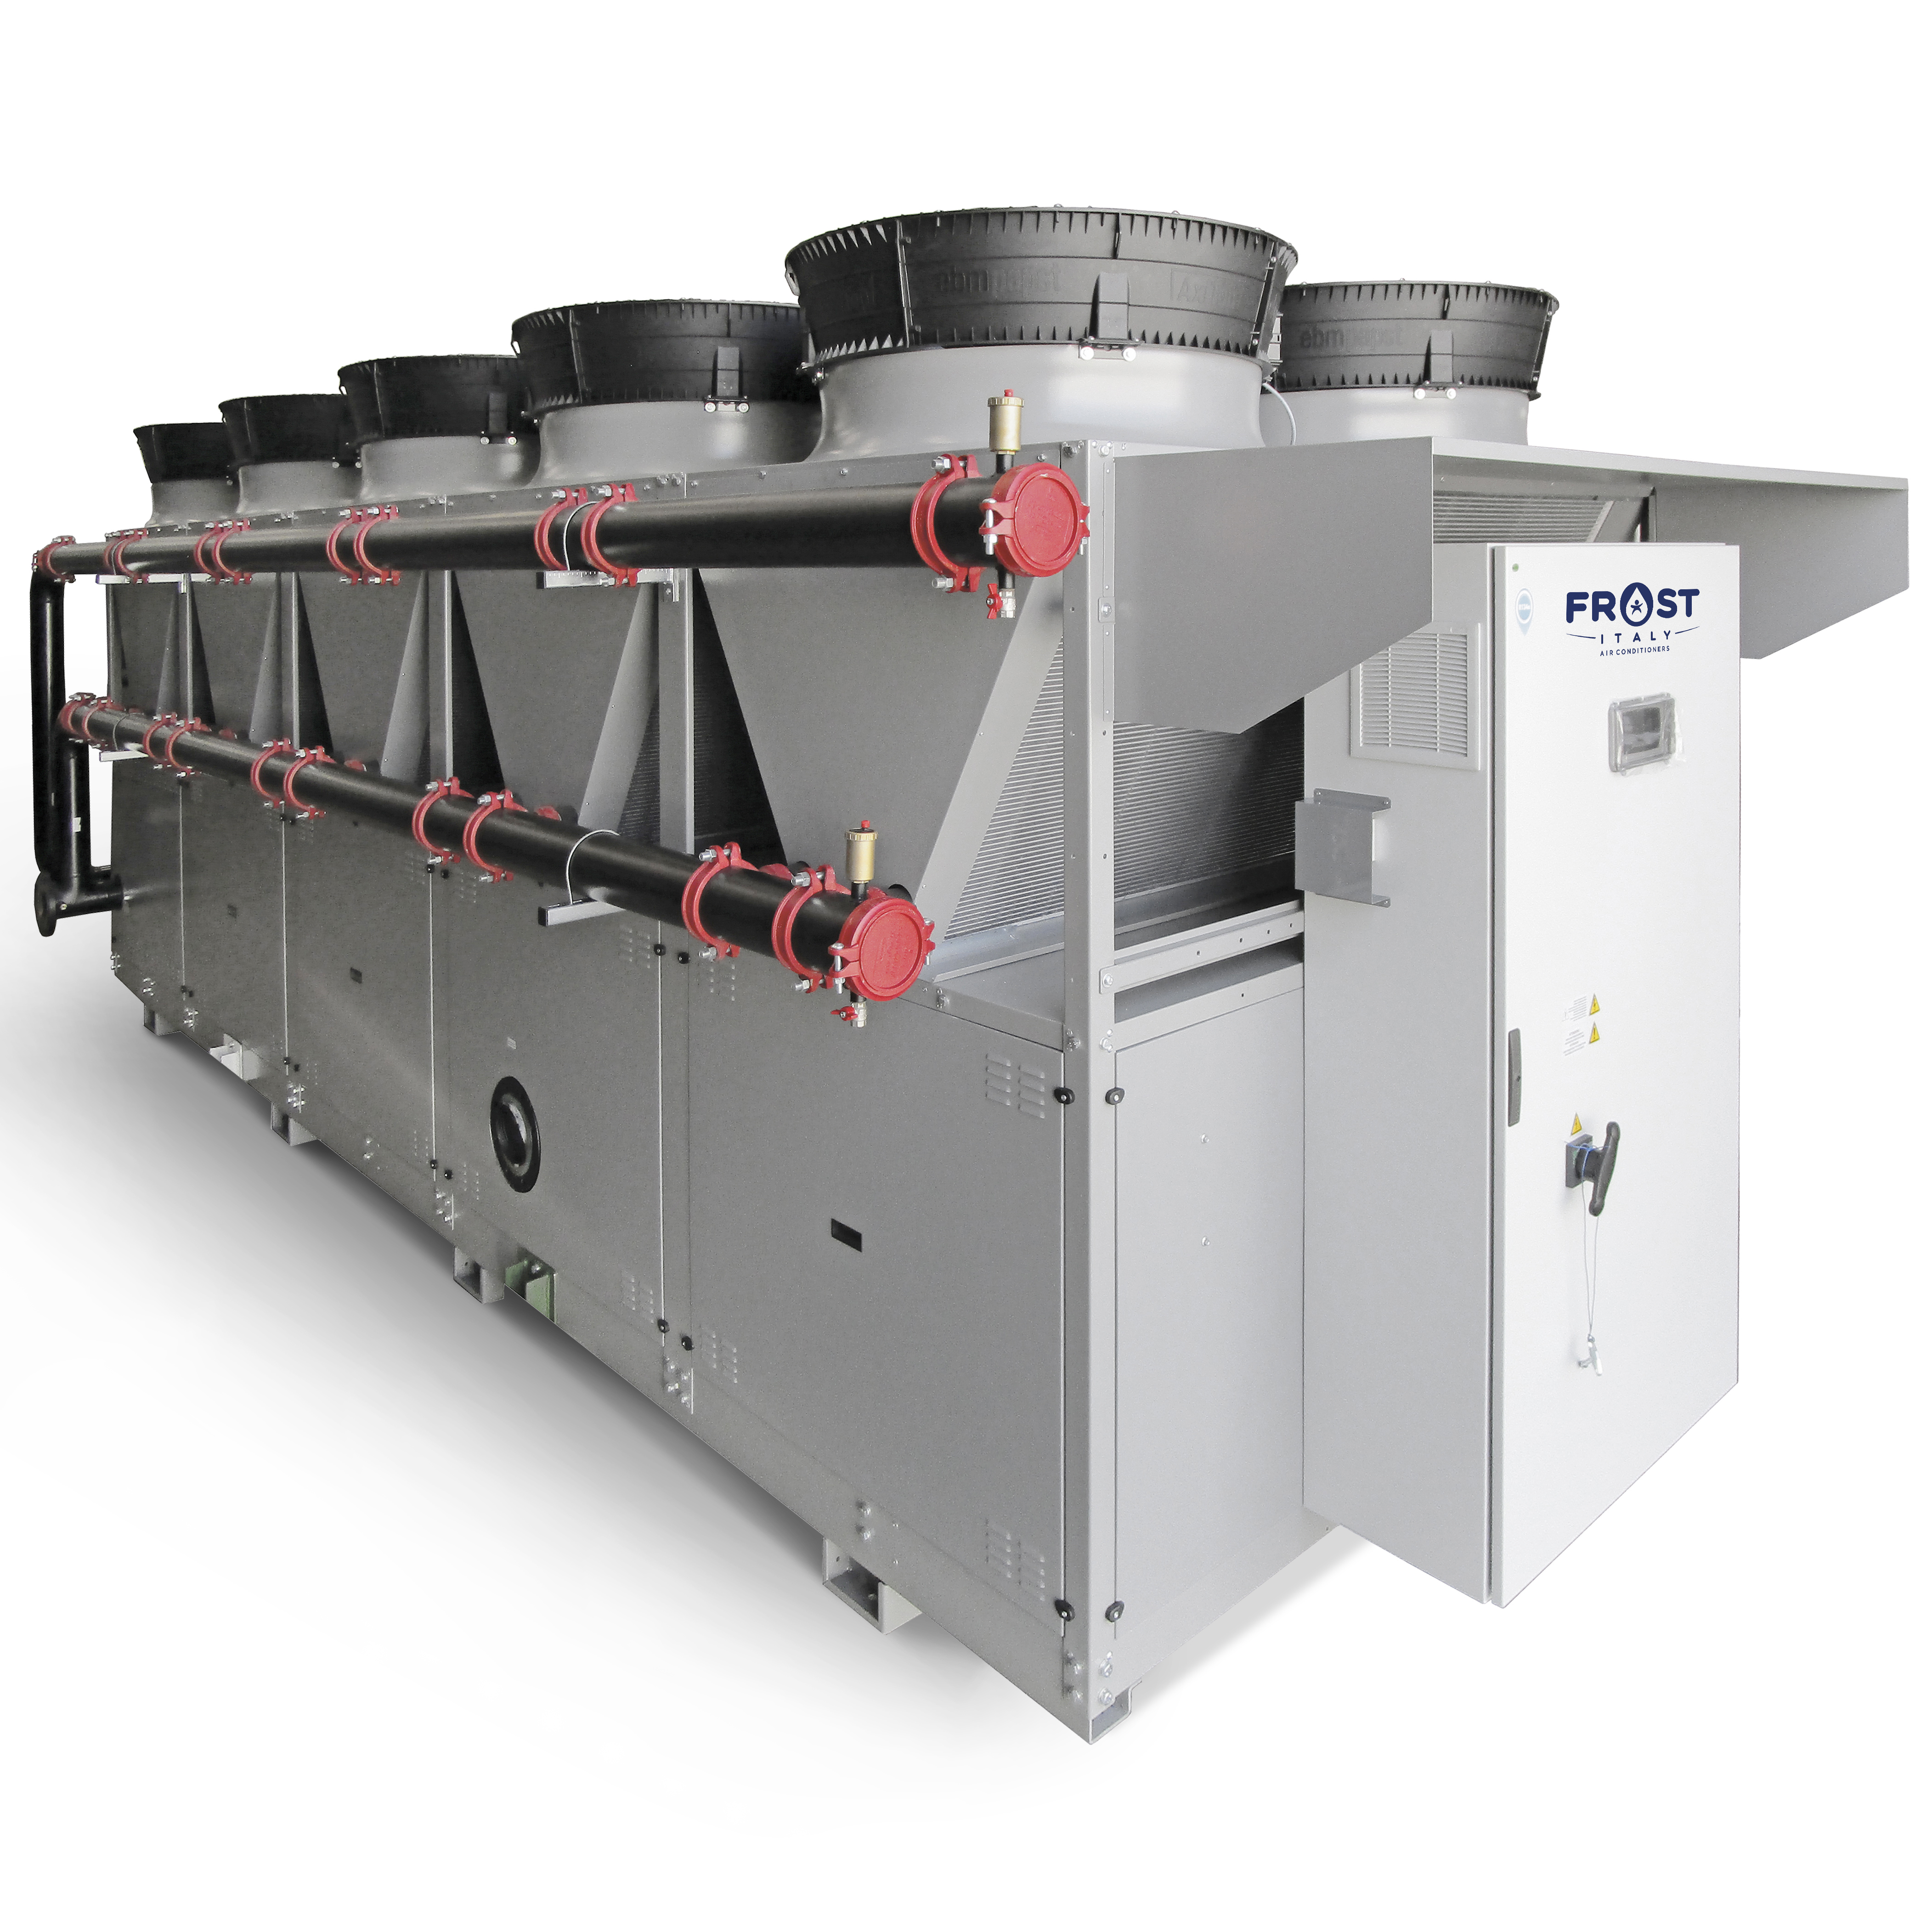 Air condensed chillers and heat pumps units